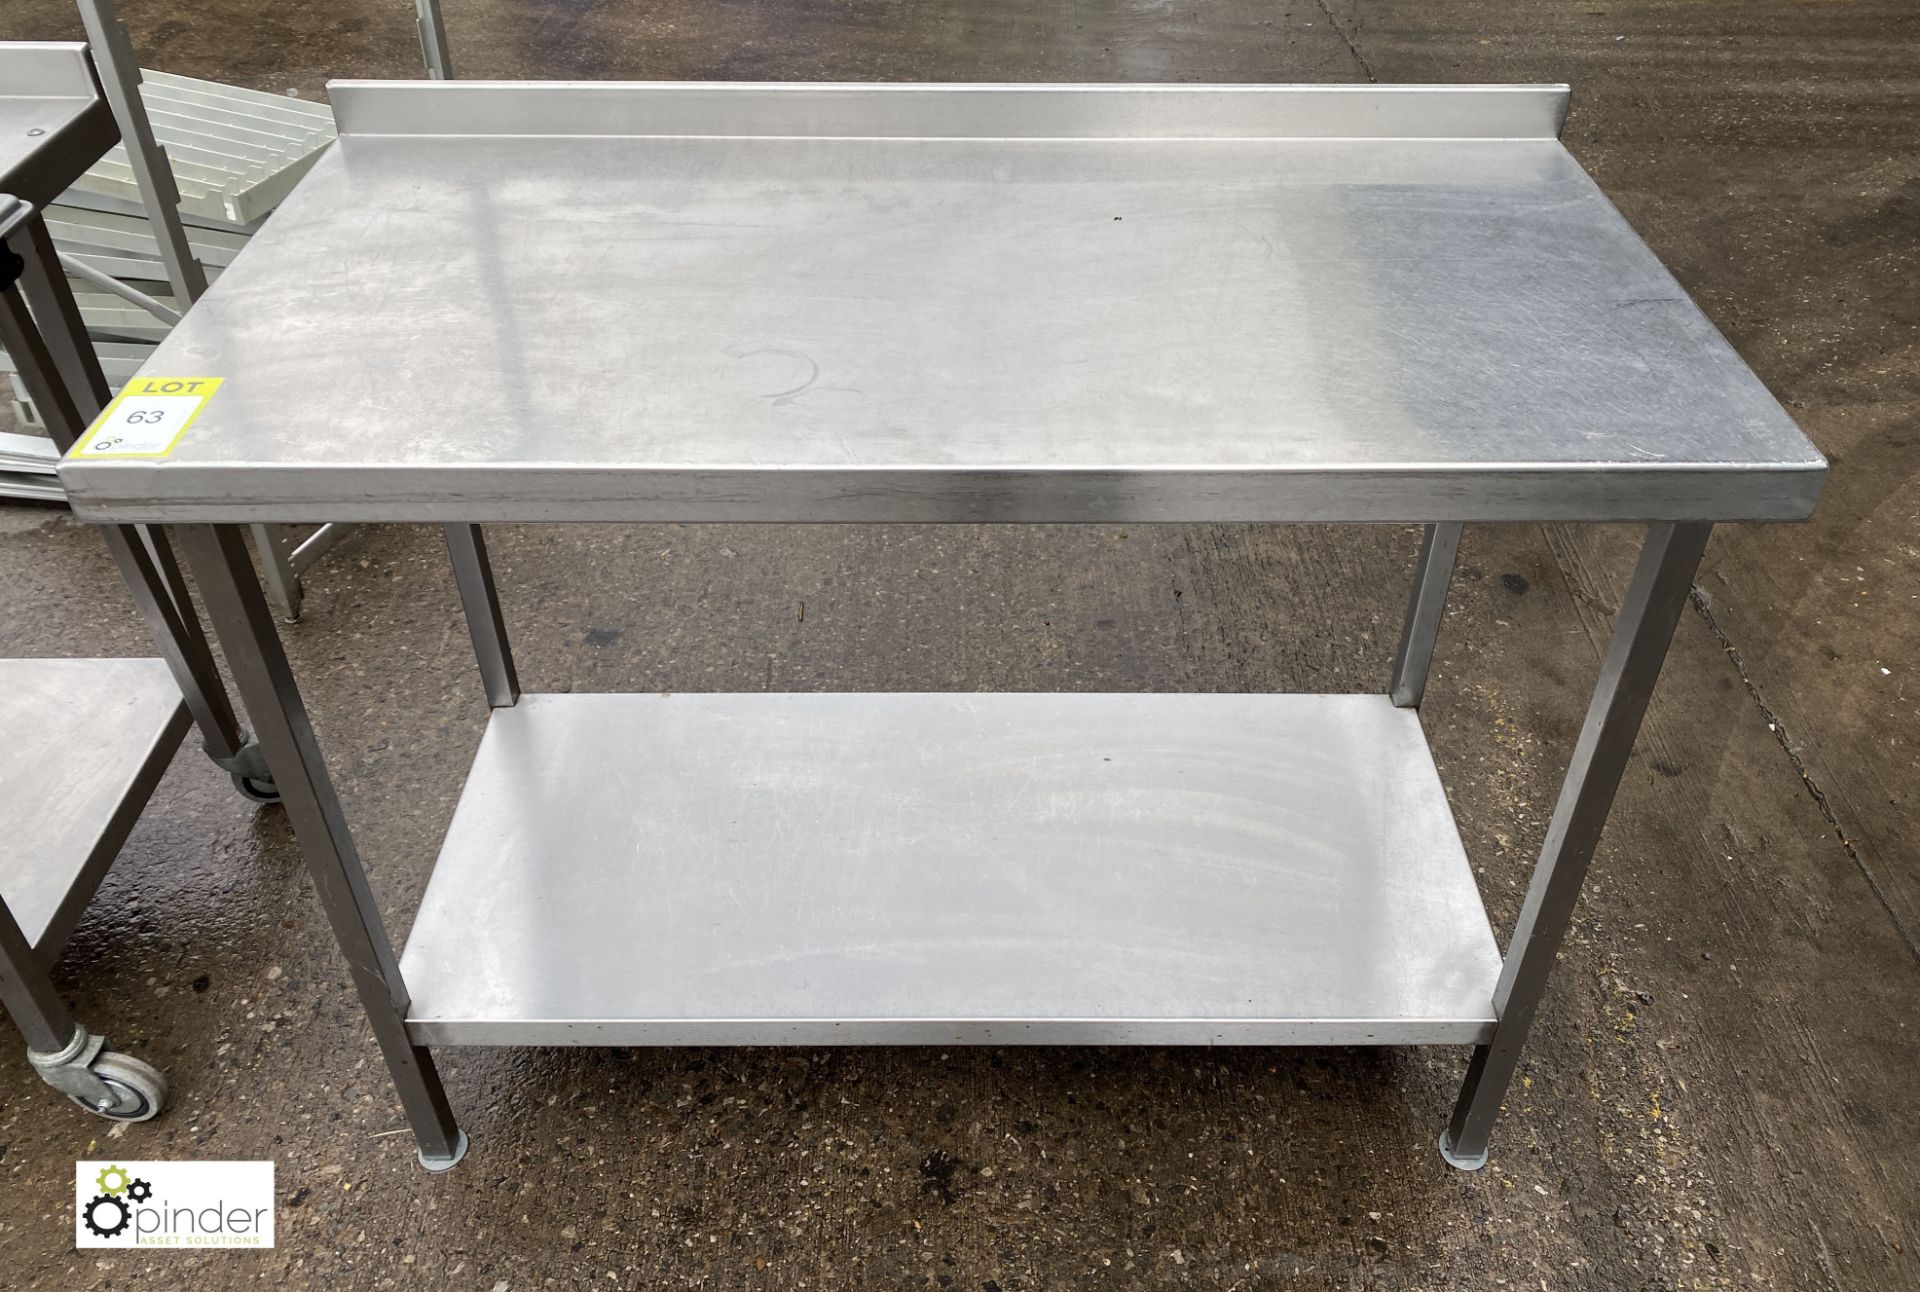 Stainless steel Preparation Table, 1200mm x 600mm x 890mm, with undershelf and rear lip (LOCATION: - Image 2 of 2